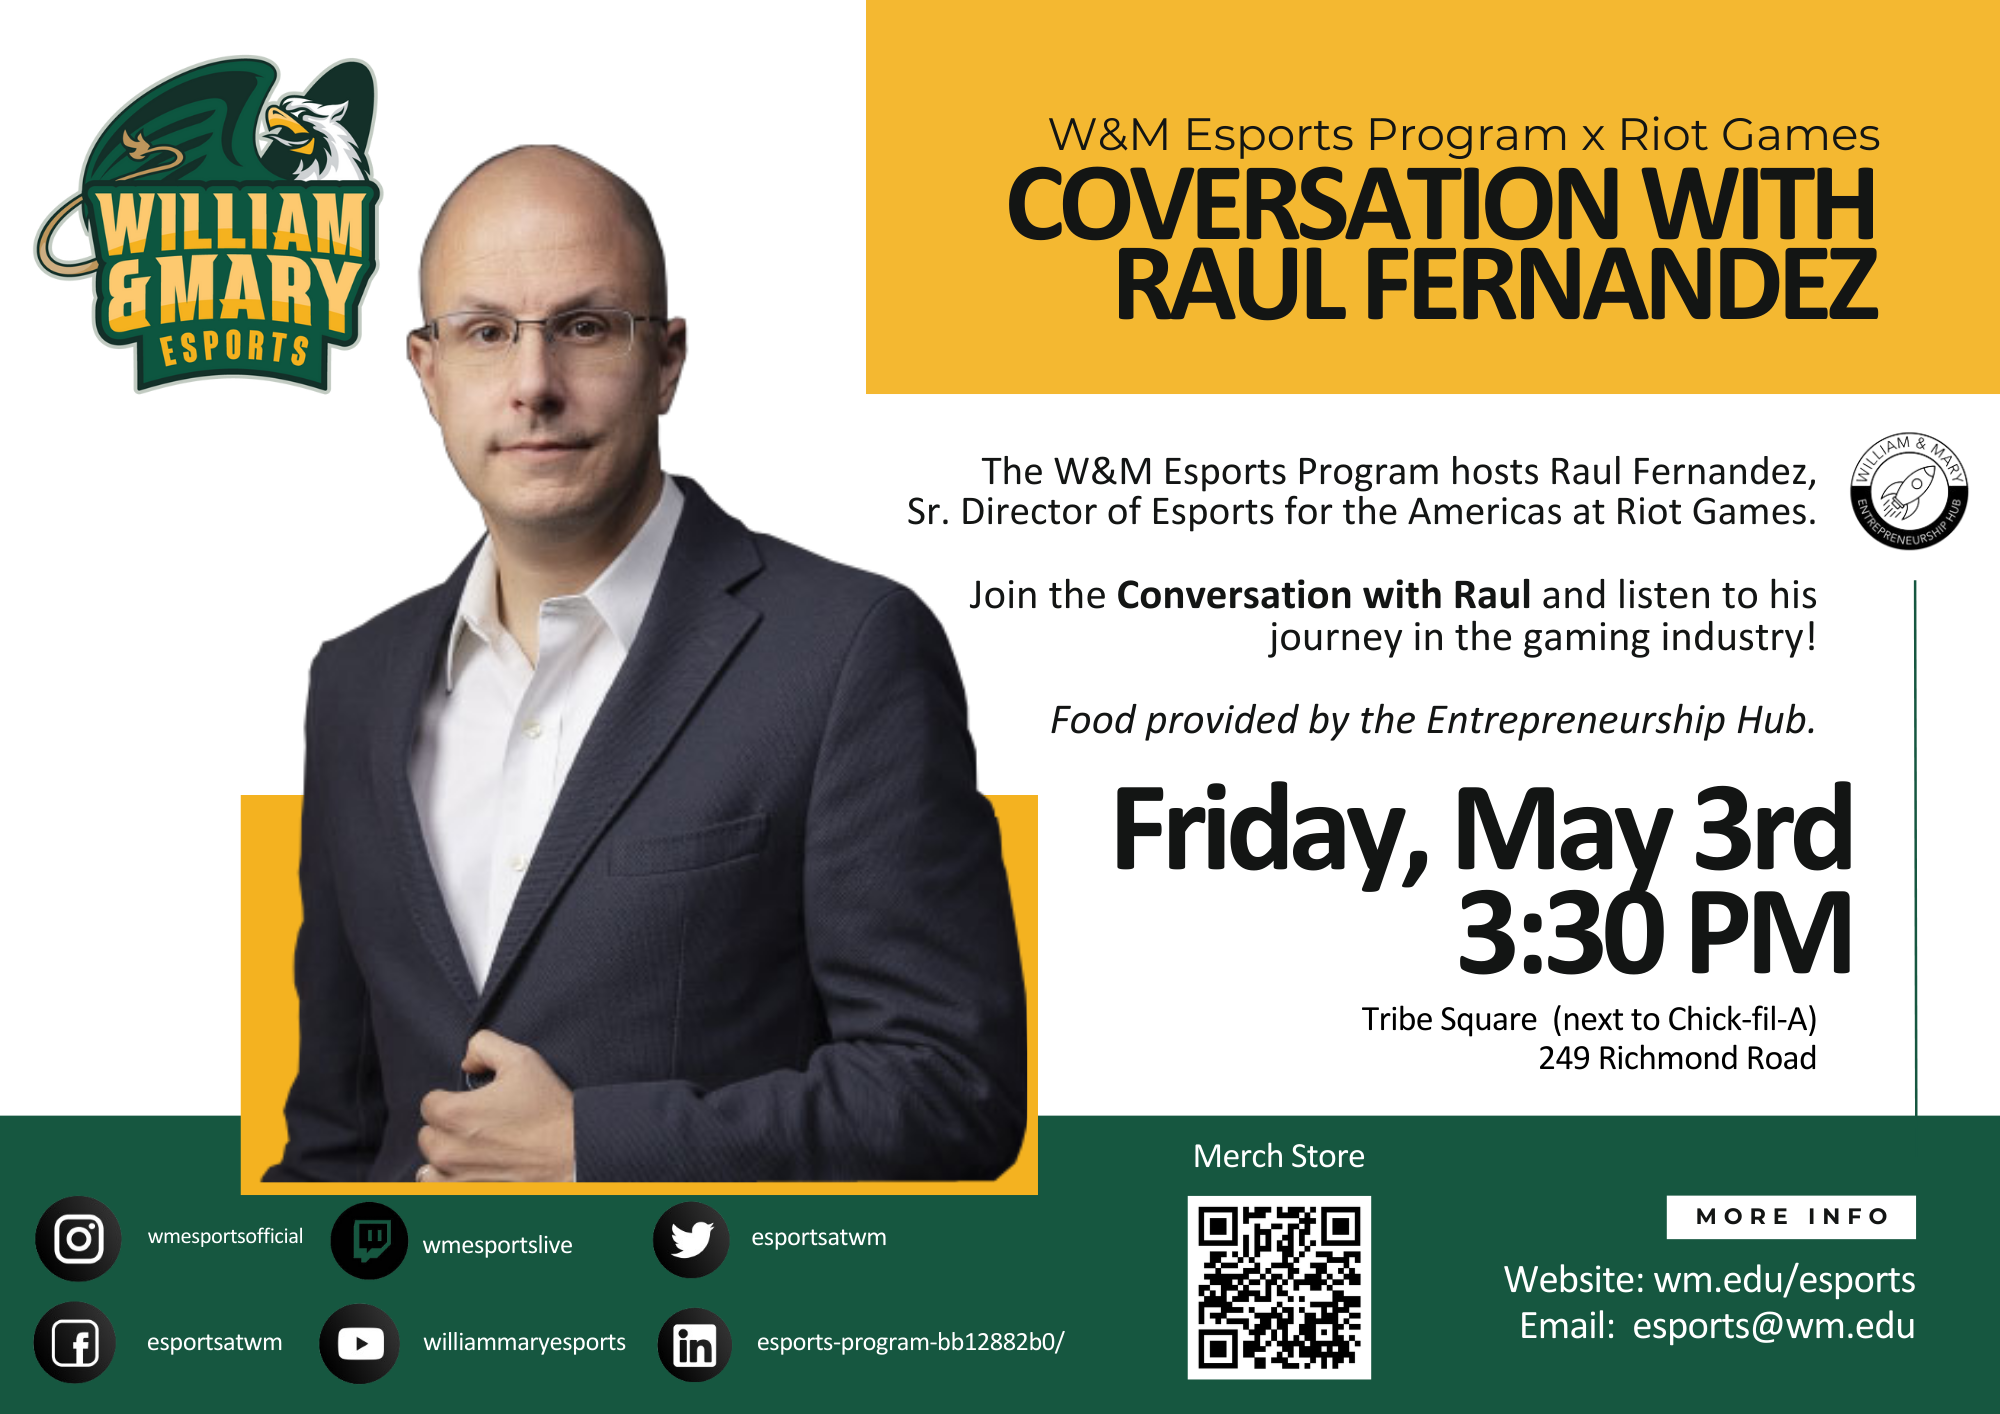 Advertising image for the William & Mary Esports event "Conversation with Raul Fernandez"